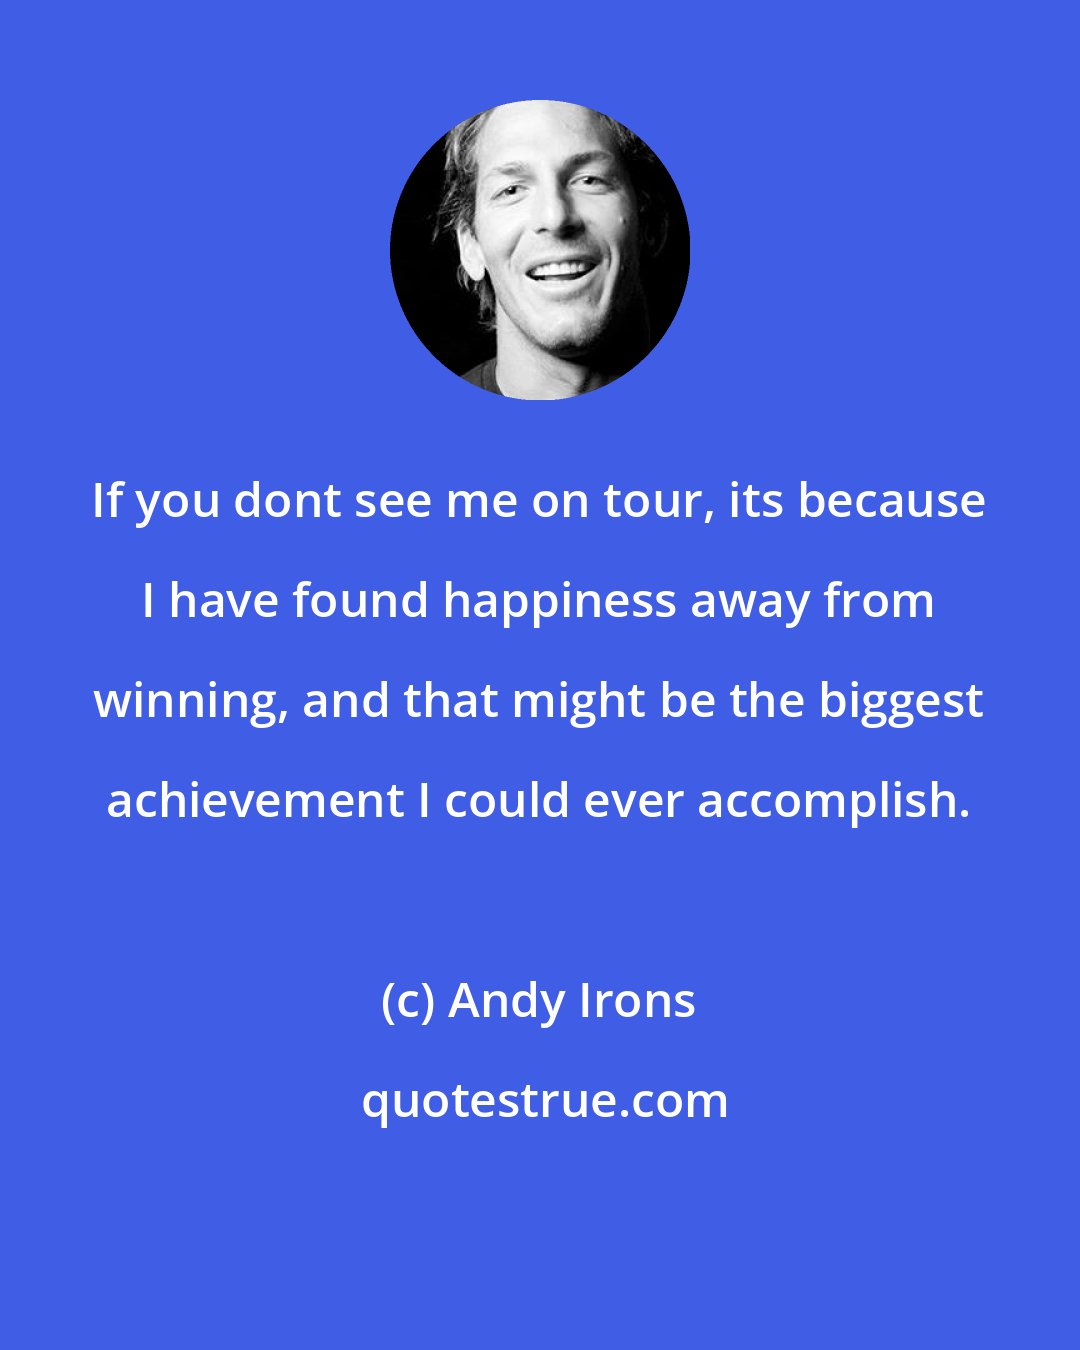 Andy Irons: If you dont see me on tour, its because I have found happiness away from winning, and that might be the biggest achievement I could ever accomplish.